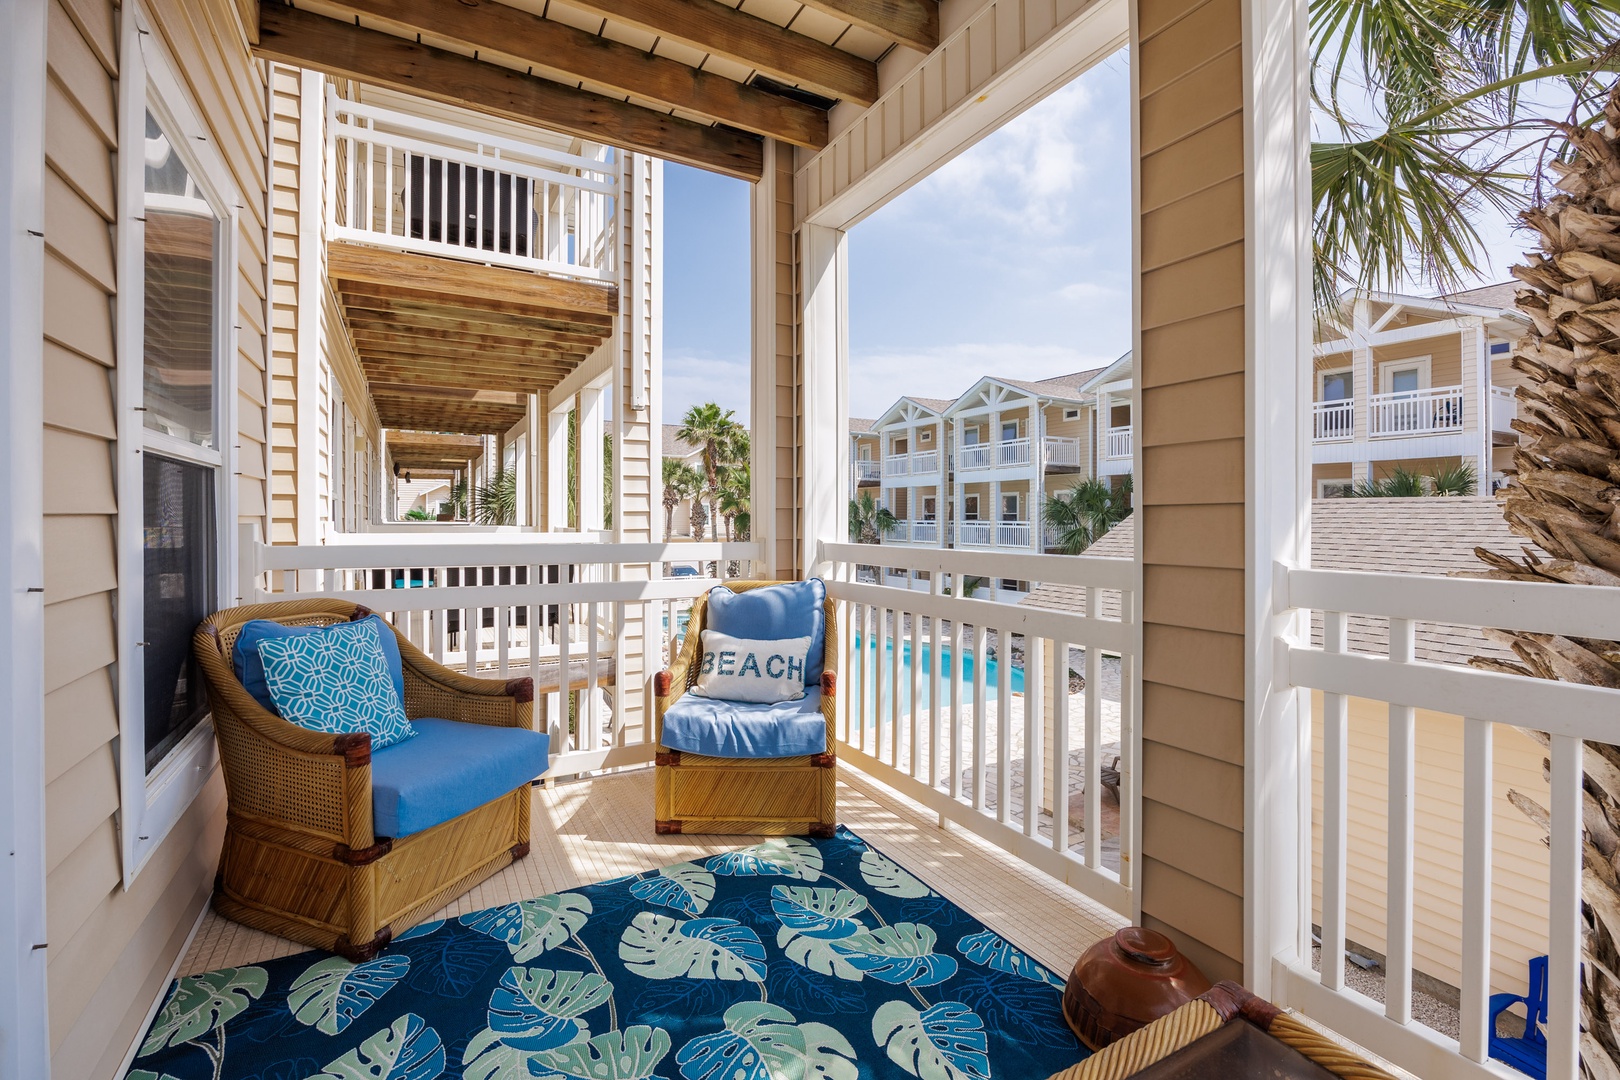 Take a breath of tranquility on the private balcony with pool view